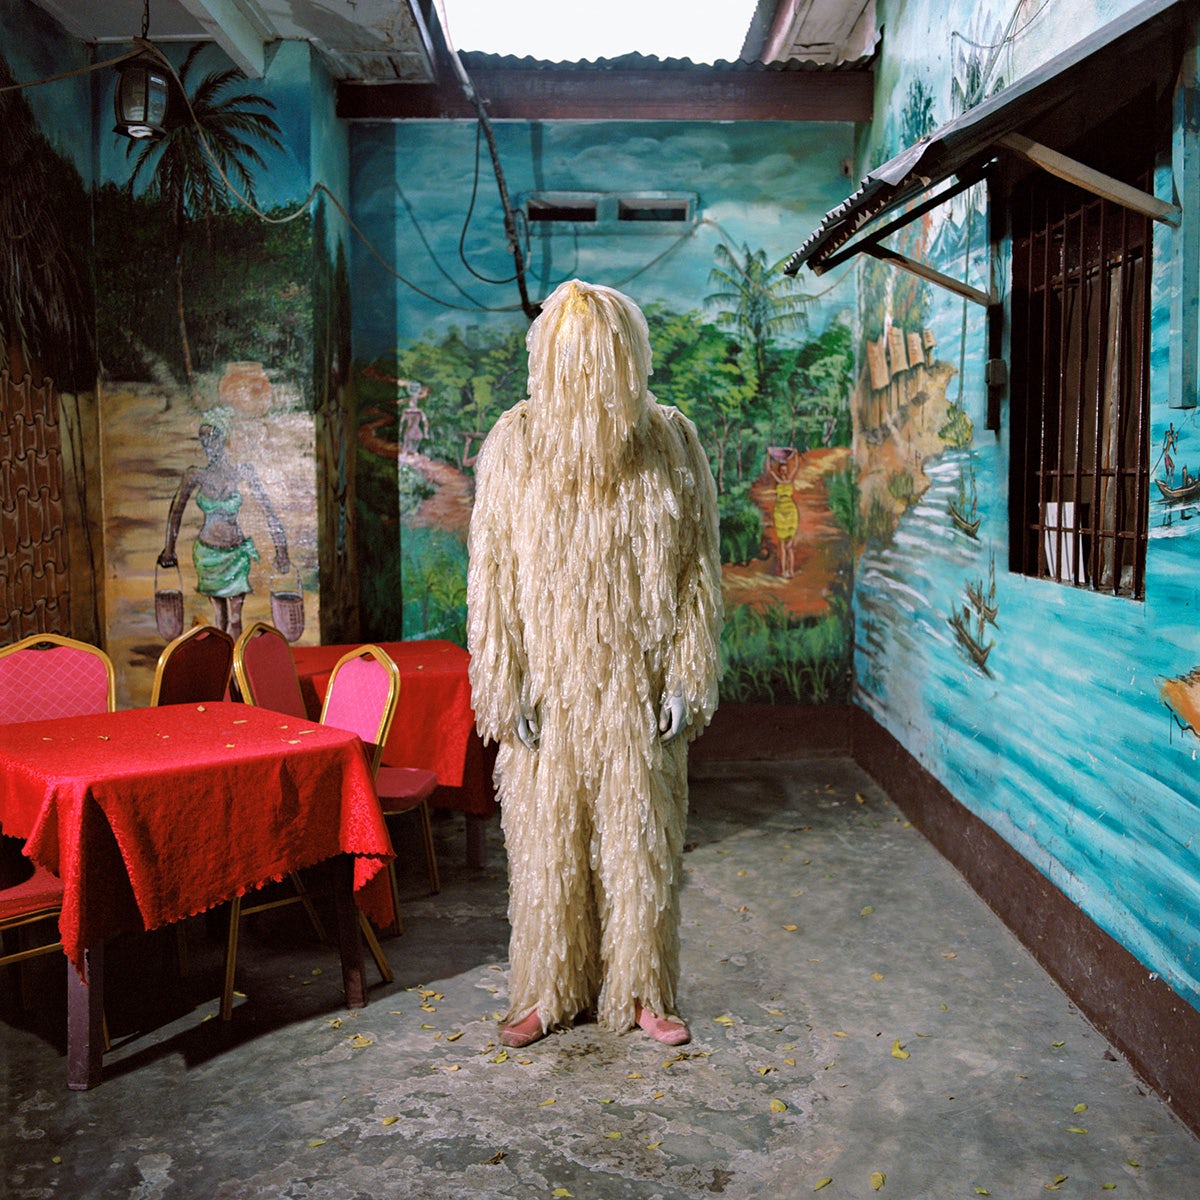 Photo by Colin Delfosse showing a person wearing a beige costume made out of waste, as though covered in layers of long hair, standing in a room with a red table and chairs, and walls painted in a beach scene